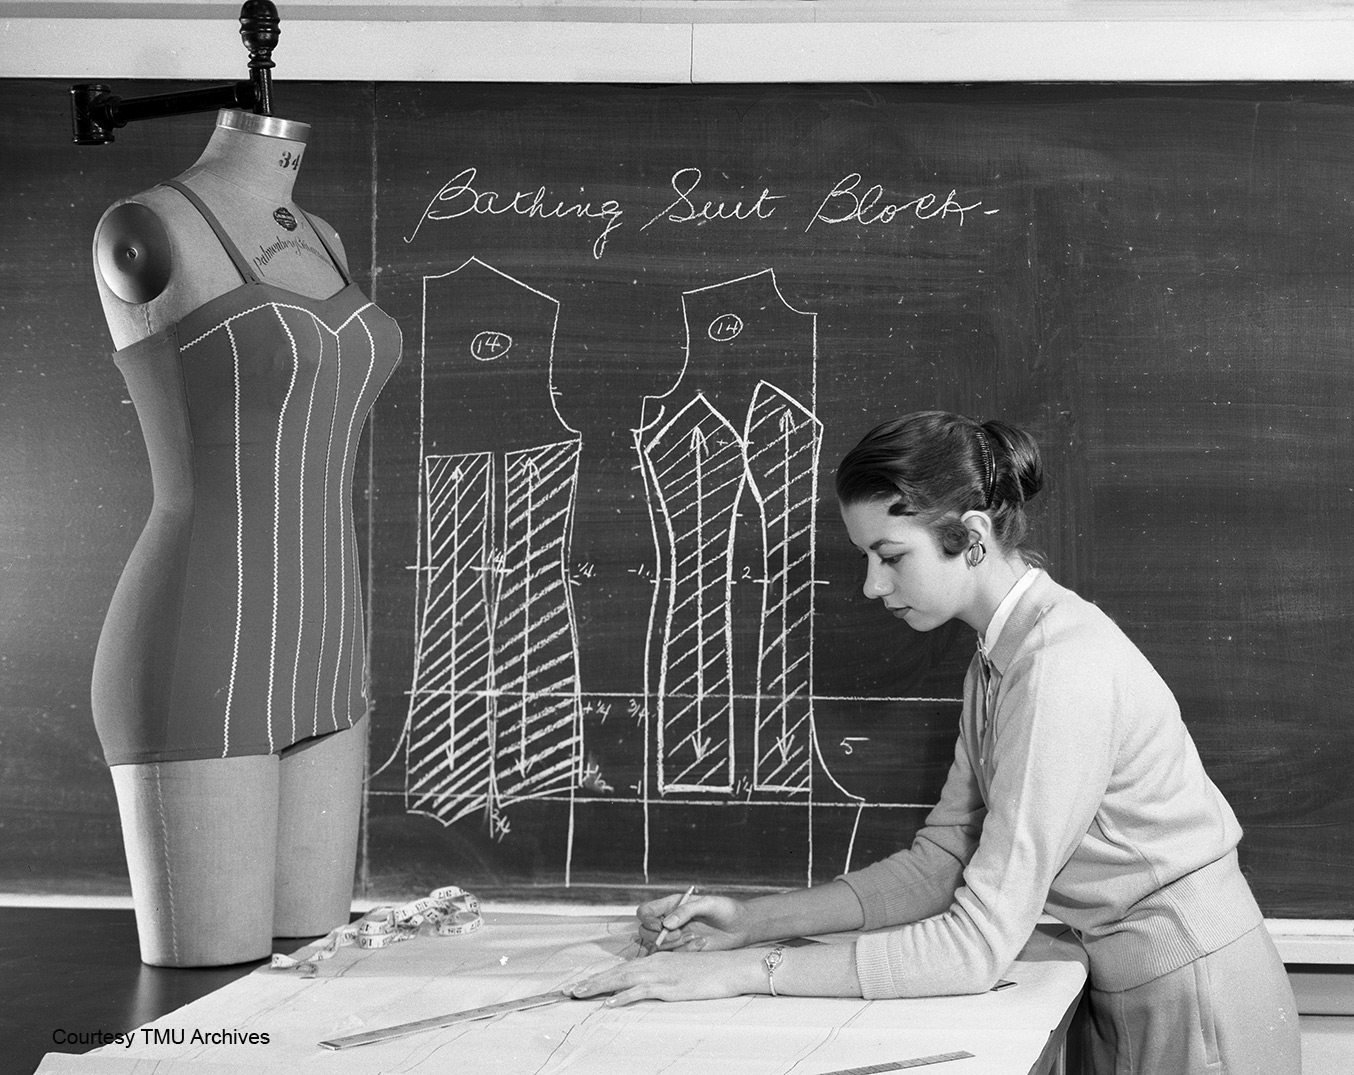 Alumna Lynn Grant, Fashion ’57, with a bathing suit block in 1957.